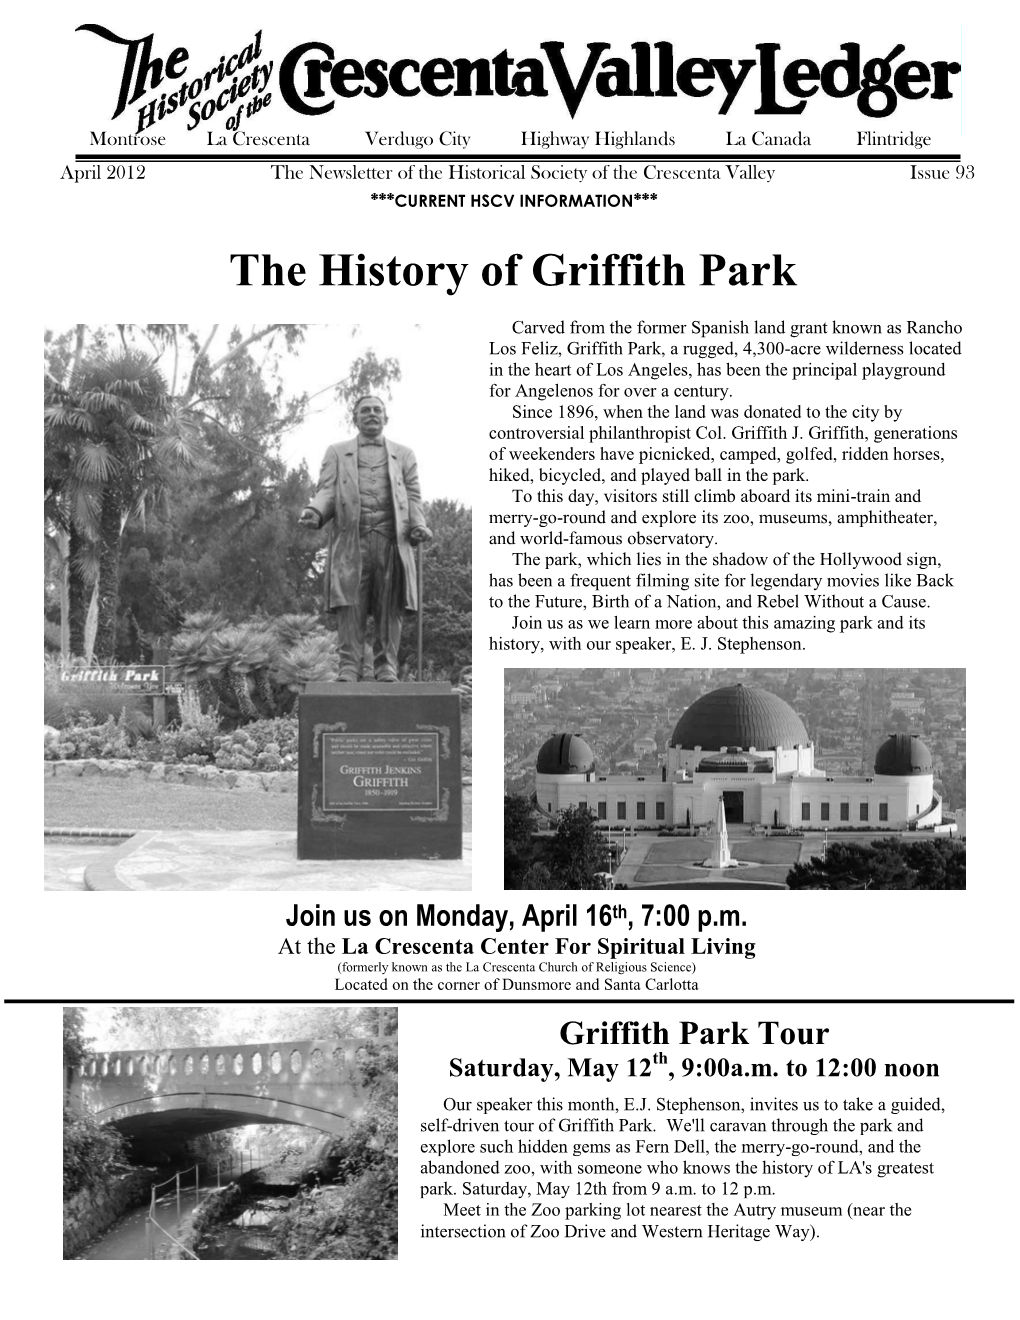 The History of Griffith Park